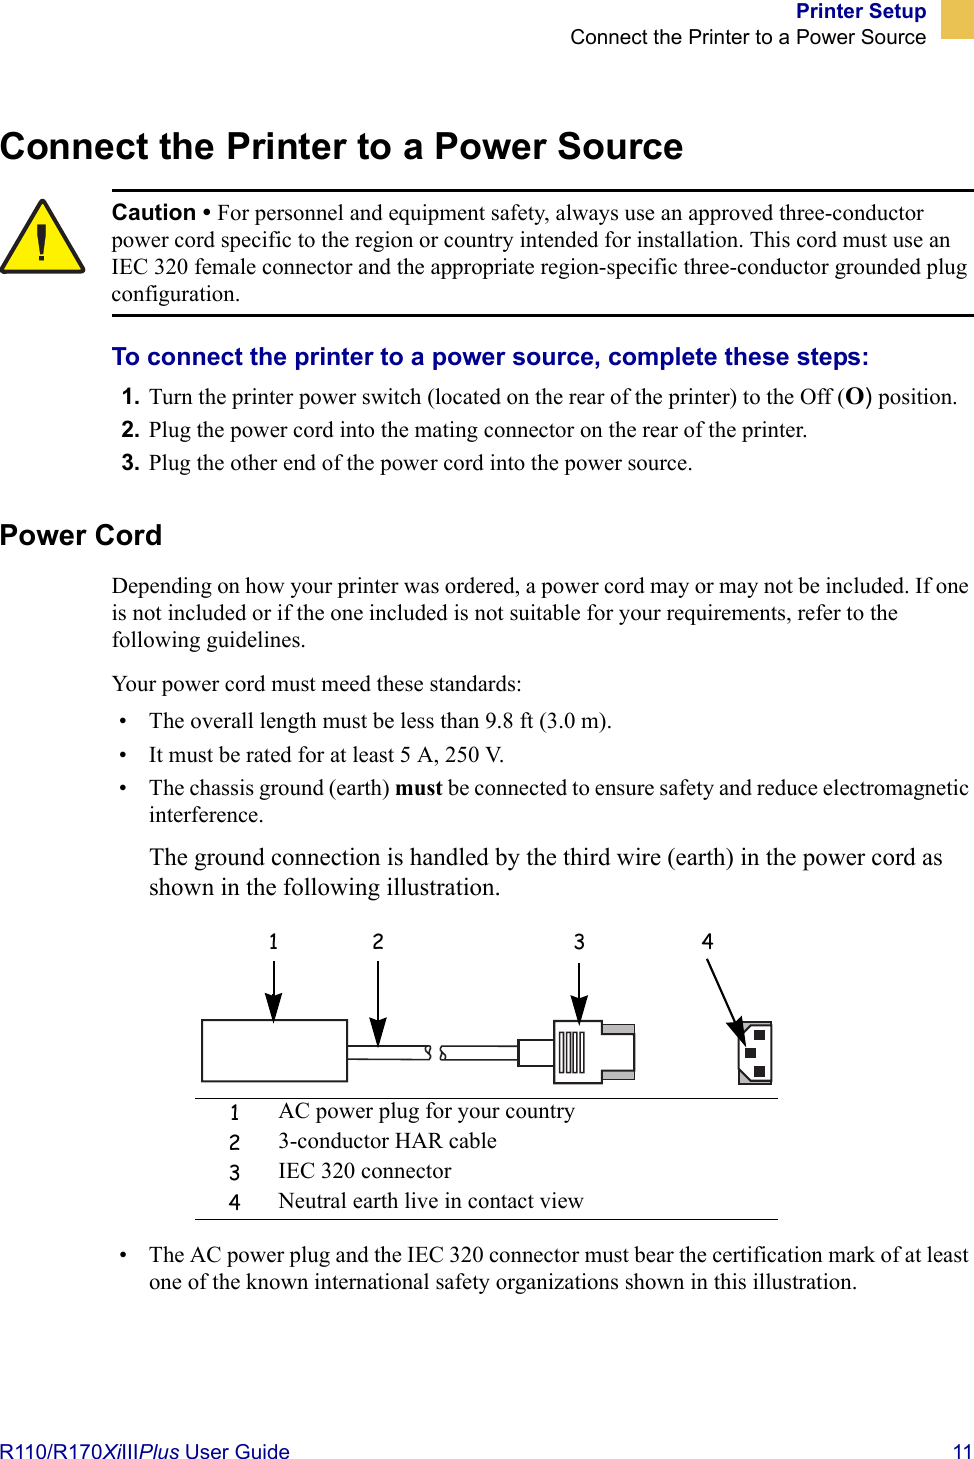 Printer SetupConnect the Printer to a Power SourceR110/R170XiIIIPlus User Guide  11Connect the Printer to a Power SourceTo connect the printer to a power source, complete these steps:1. Turn the printer power switch (located on the rear of the printer) to the Off (O) position.2. Plug the power cord into the mating connector on the rear of the printer.3. Plug the other end of the power cord into the power source.Power CordDepending on how your printer was ordered, a power cord may or may not be included. If one is not included or if the one included is not suitable for your requirements, refer to the following guidelines.Your power cord must meed these standards:• The overall length must be less than 9.8 ft (3.0 m).• It must be rated for at least 5 A, 250 V.• The chassis ground (earth) must be connected to ensure safety and reduce electromagnetic interference. The ground connection is handled by the third wire (earth) in the power cord as shown in the following illustration.• The AC power plug and the IEC 320 connector must bear the certification mark of at least one of the known international safety organizations shown in this illustration.Caution • For personnel and equipment safety, always use an approved three-conductor power cord specific to the region or country intended for installation. This cord must use an IEC 320 female connector and the appropriate region-specific three-conductor grounded plug configuration.1AC power plug for your country23-conductor HAR cable3IEC 320 connector4Neutral earth live in contact view1 2 3 4